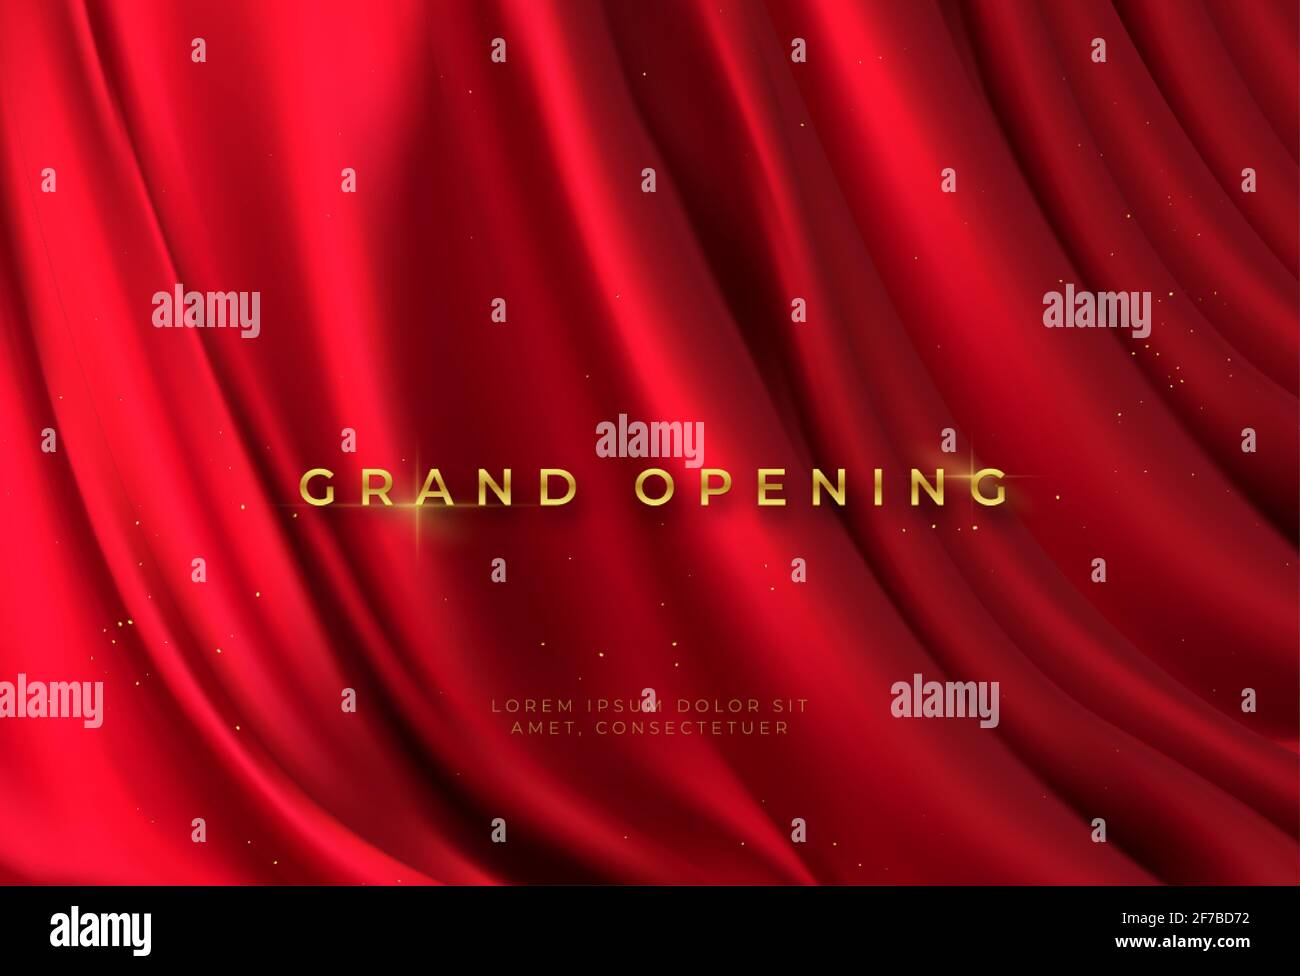 Grand Opening Invitation Card with Red Curtain Stock Illustration